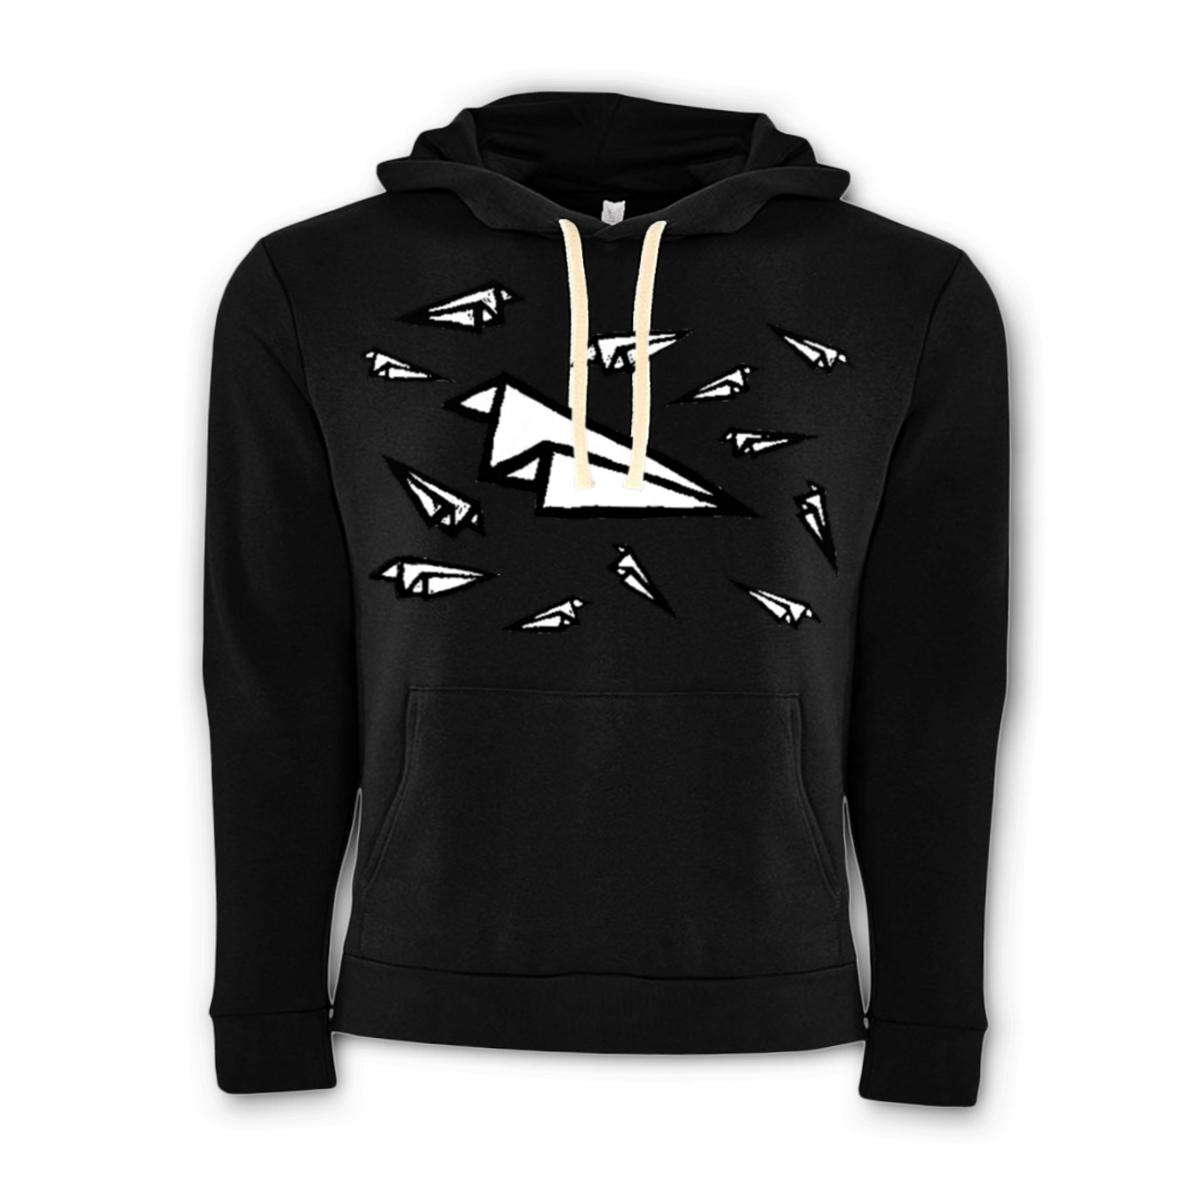 Airplane Frenzy Unisex Pullover Hoodie Extra Large black